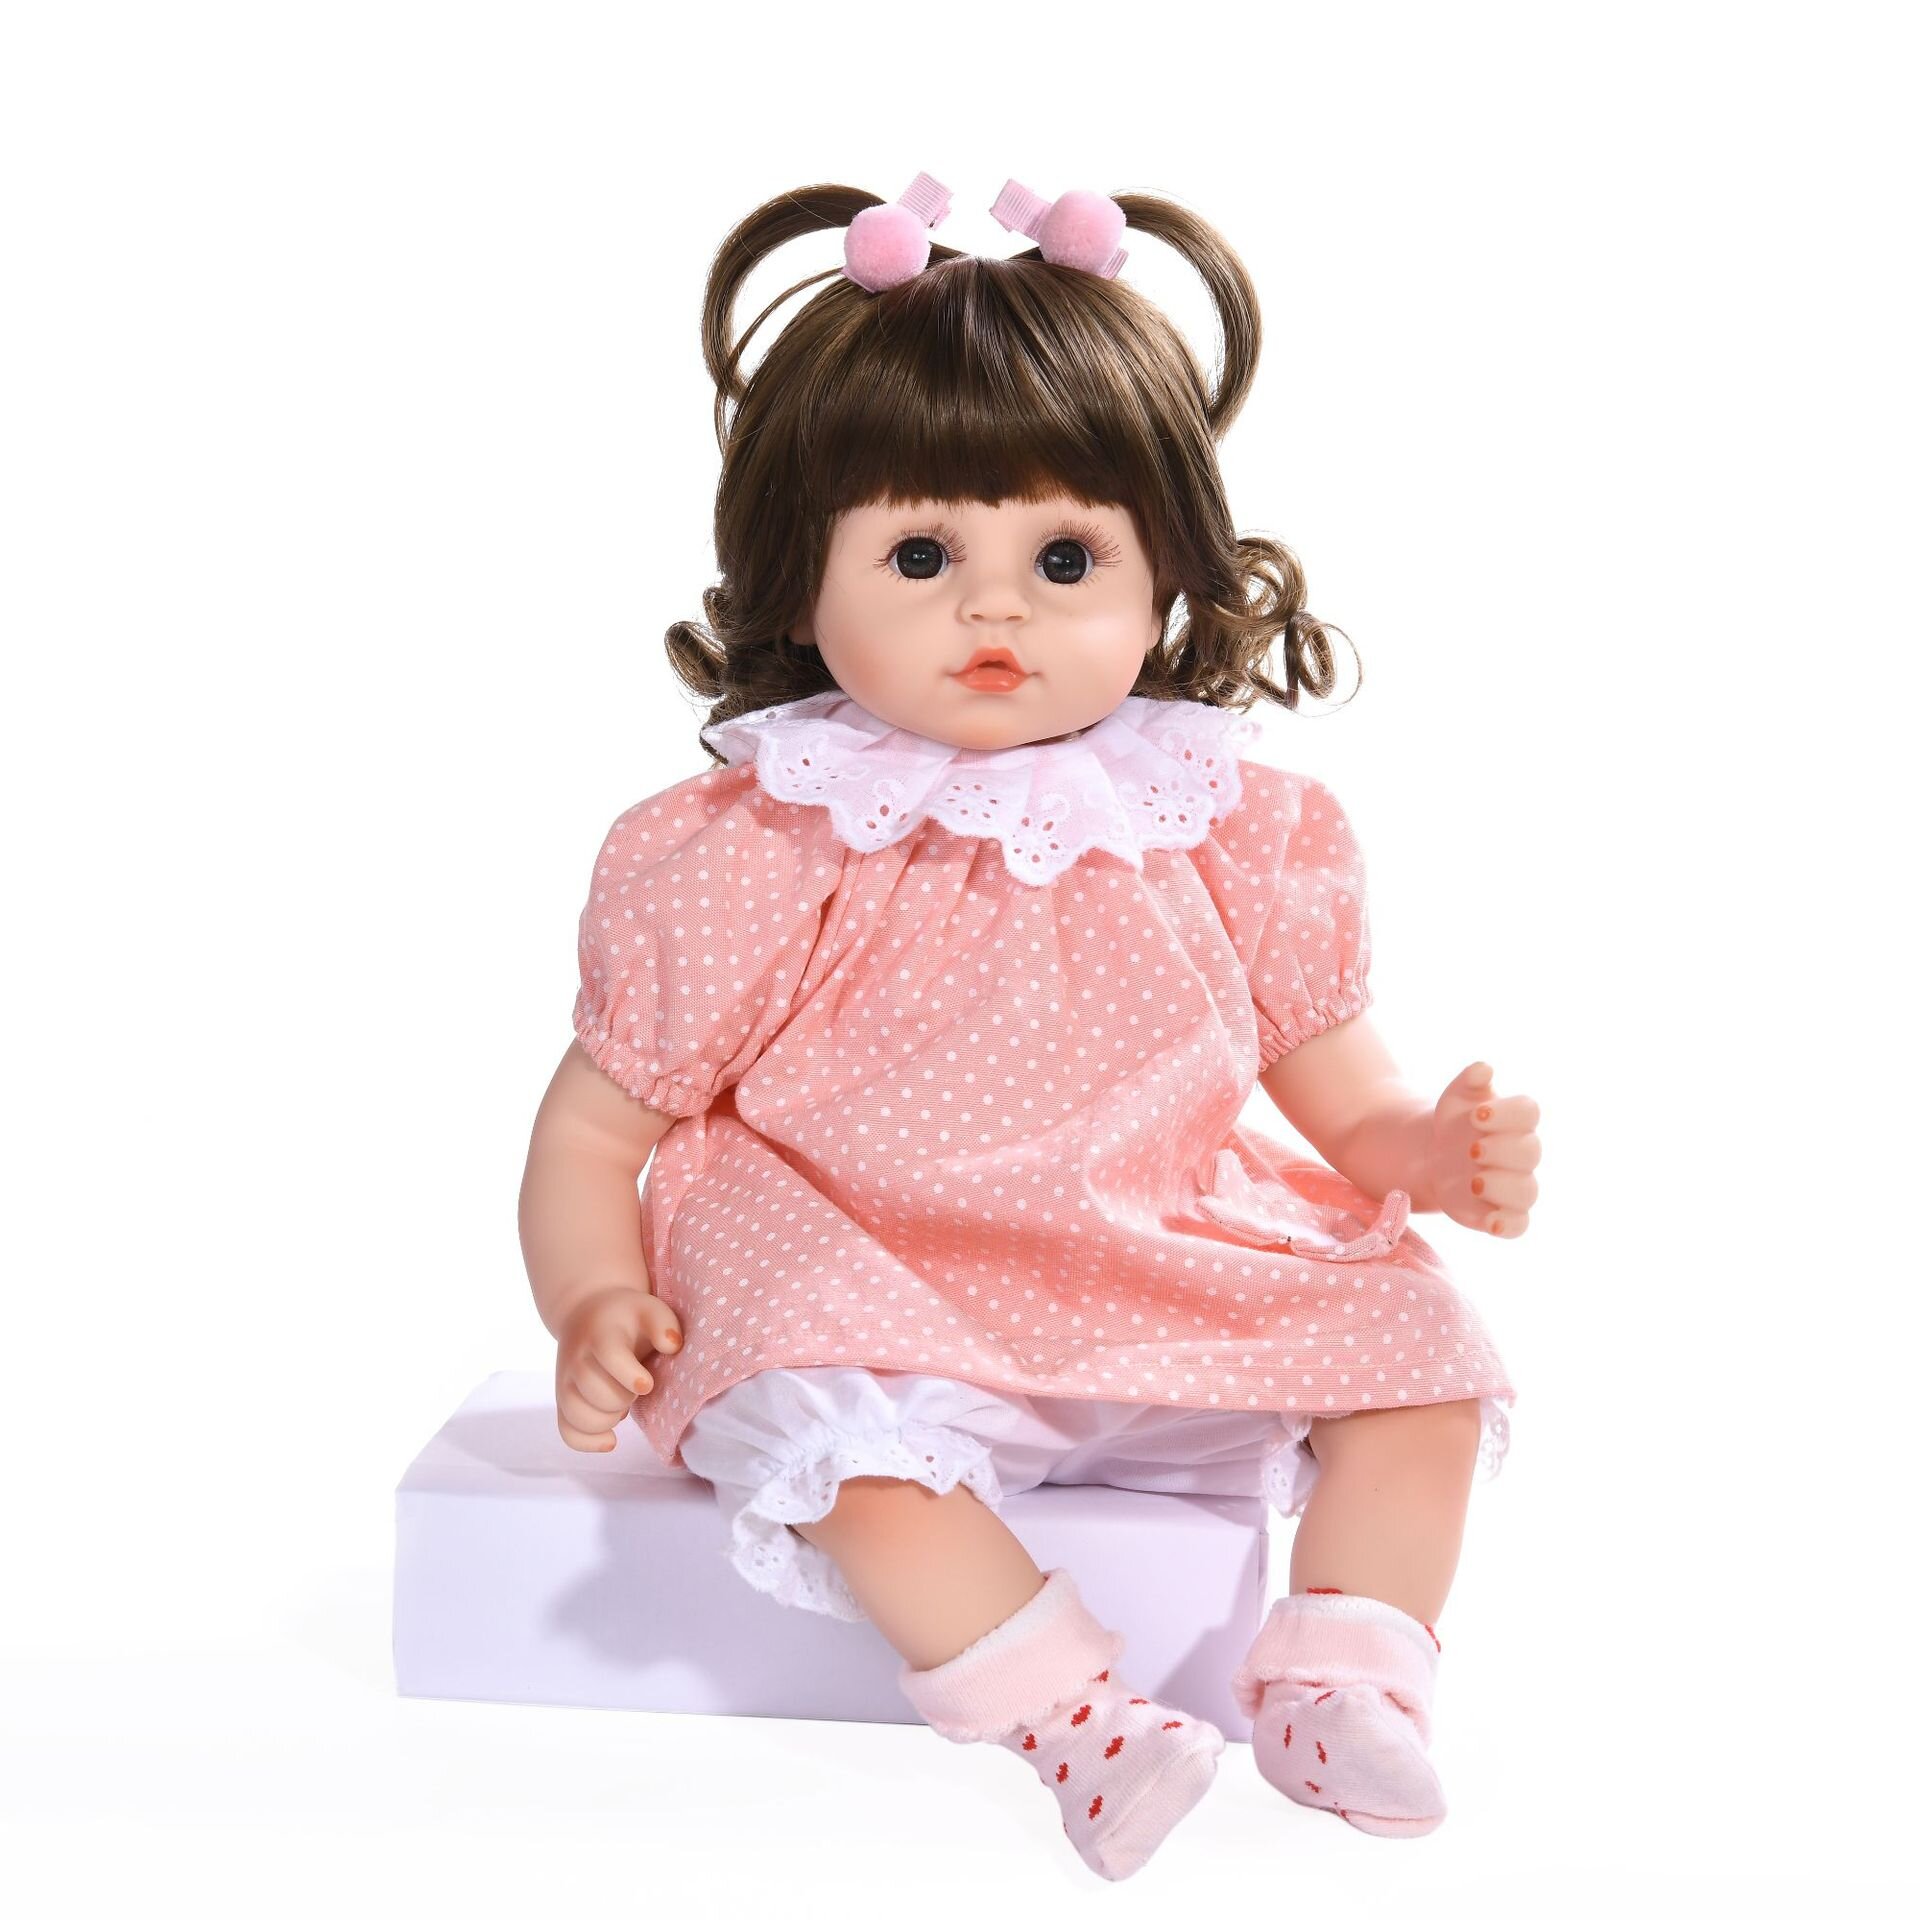 Handmade Baby Doll Surprise Gifts for Kids A6